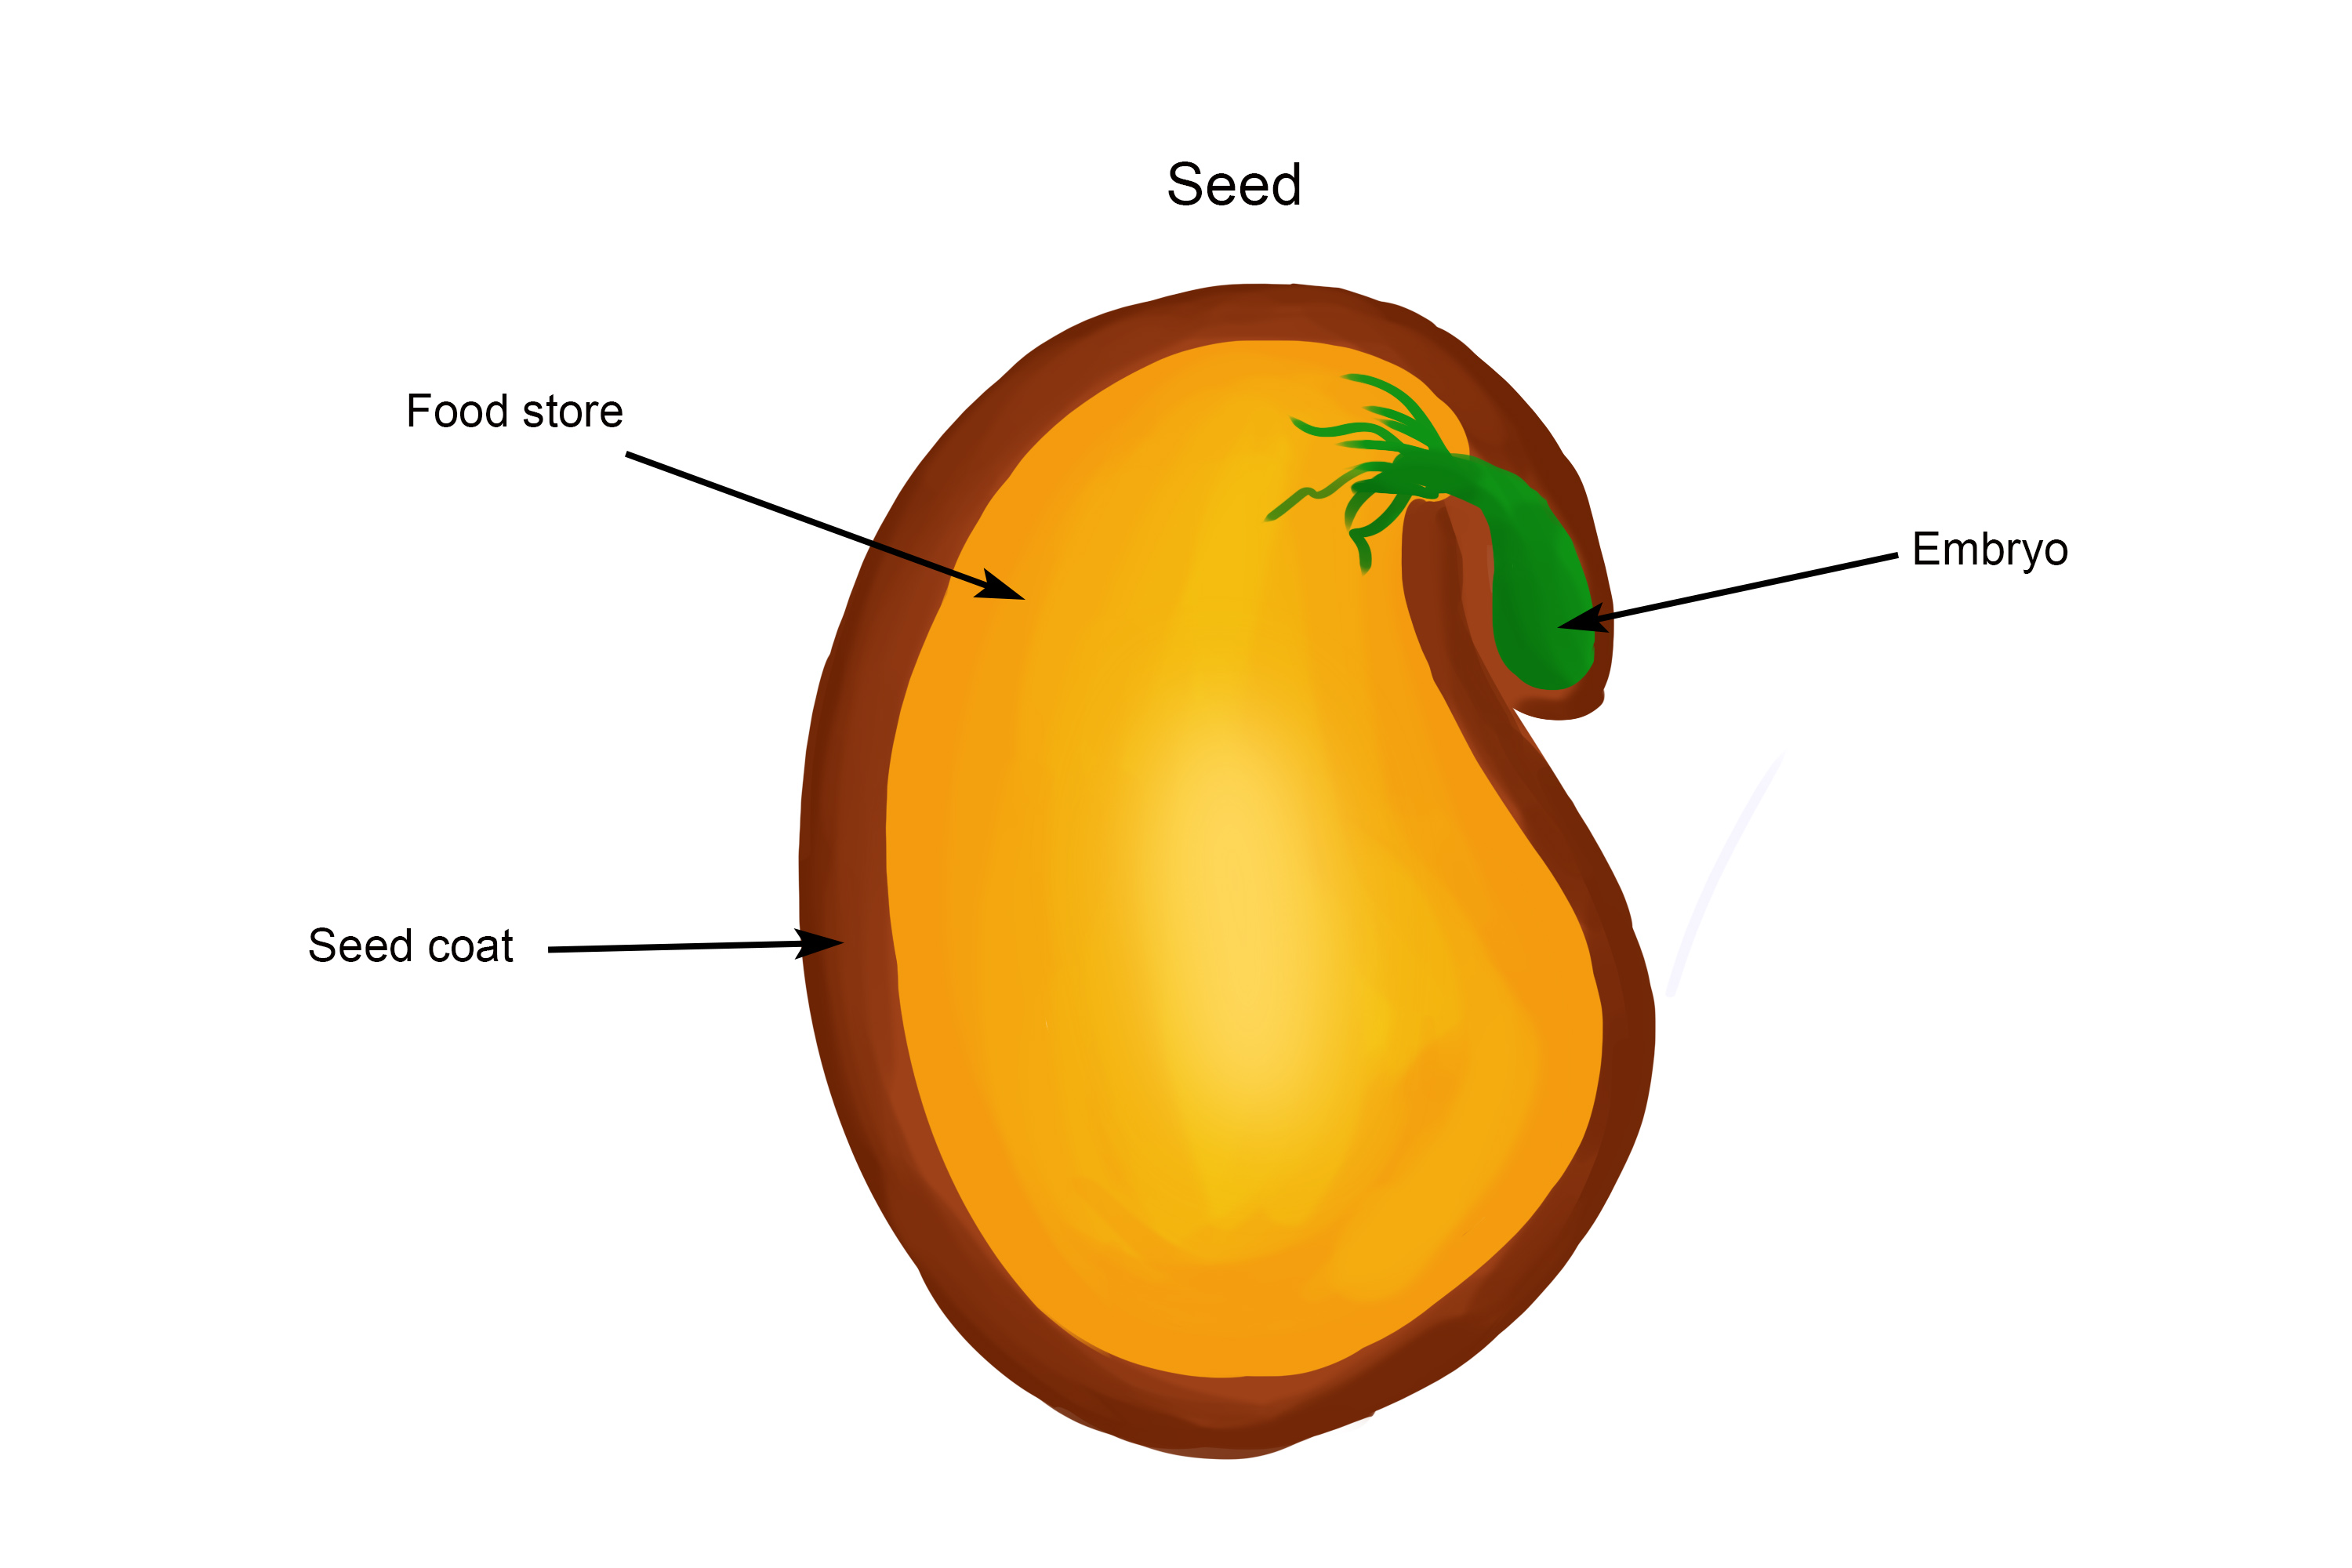 Once an egg is fertilized it becomes a seed the seed is sorounded by a food store that provides the embryo with enough food to continue growth